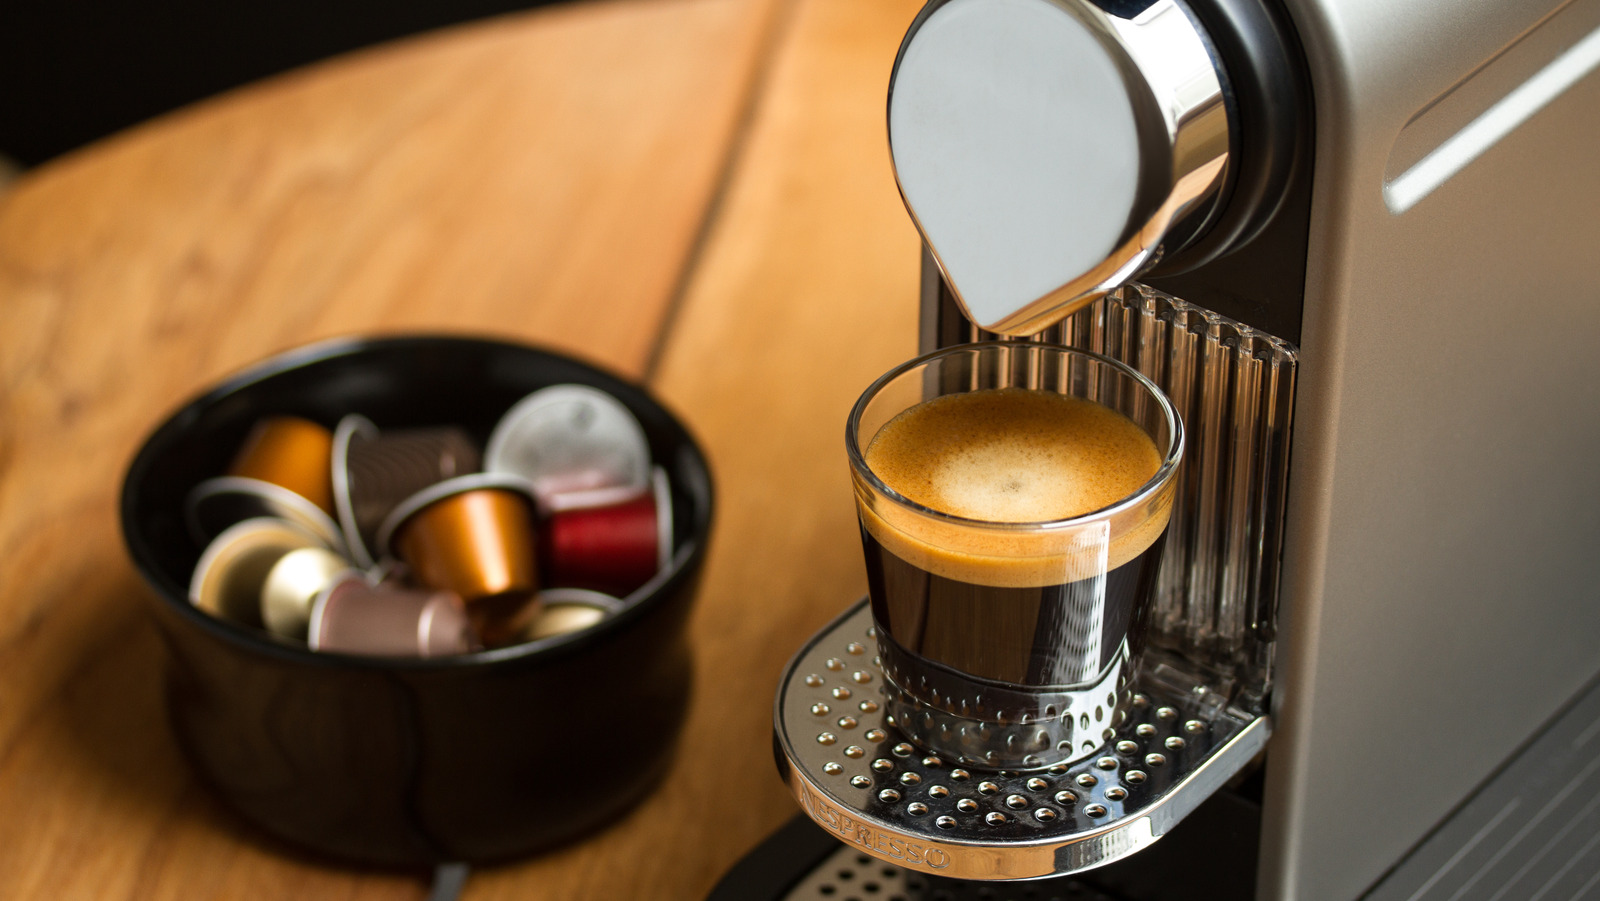 https://www.thedailymeal.com/img/gallery/how-to-clean-a-nespresso-coffee-machine/l-intro-1694454773.jpg